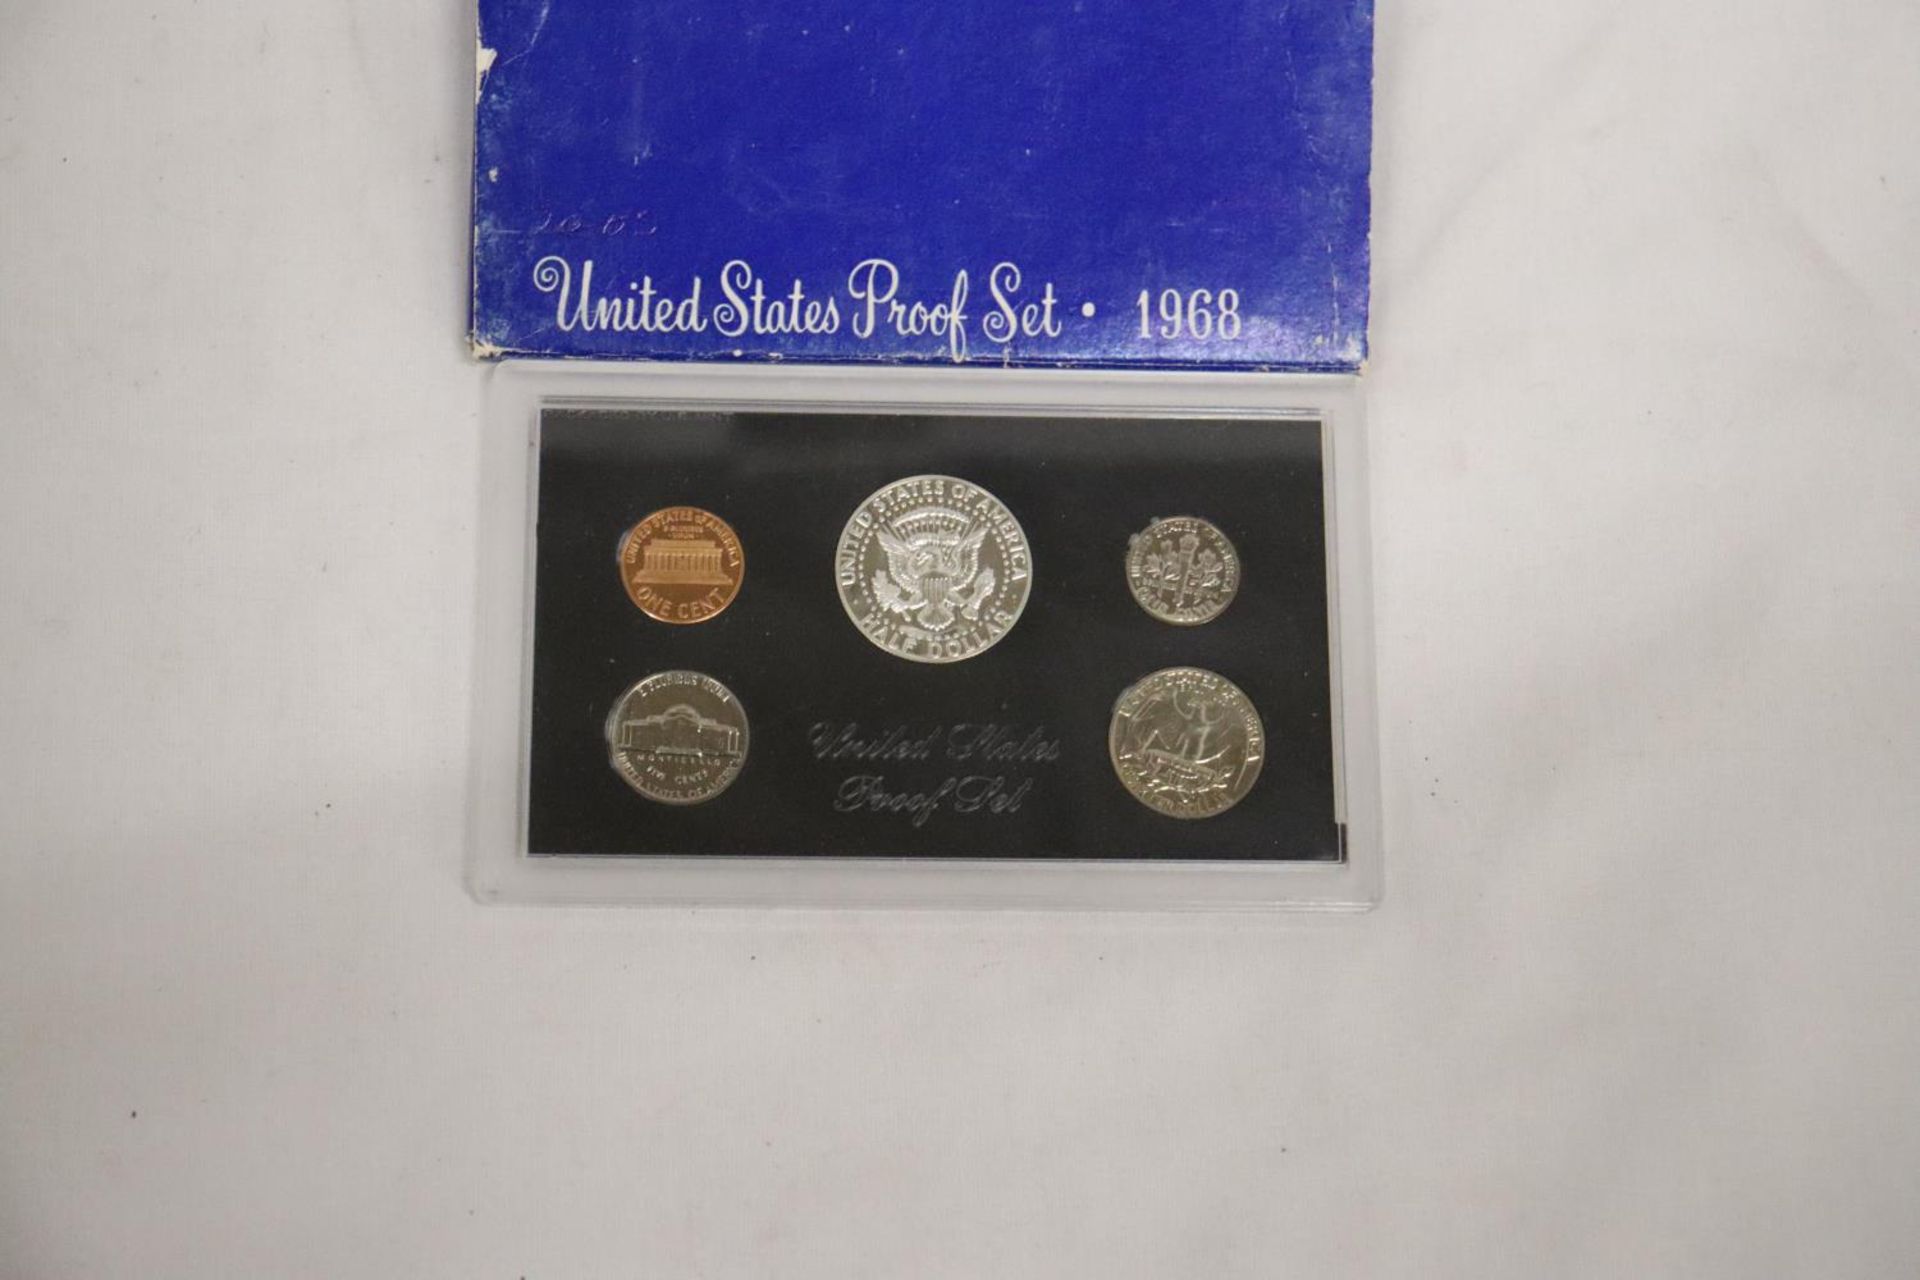 A 1968 UNITED STATES PROOF SET OF COINS - Image 3 of 5